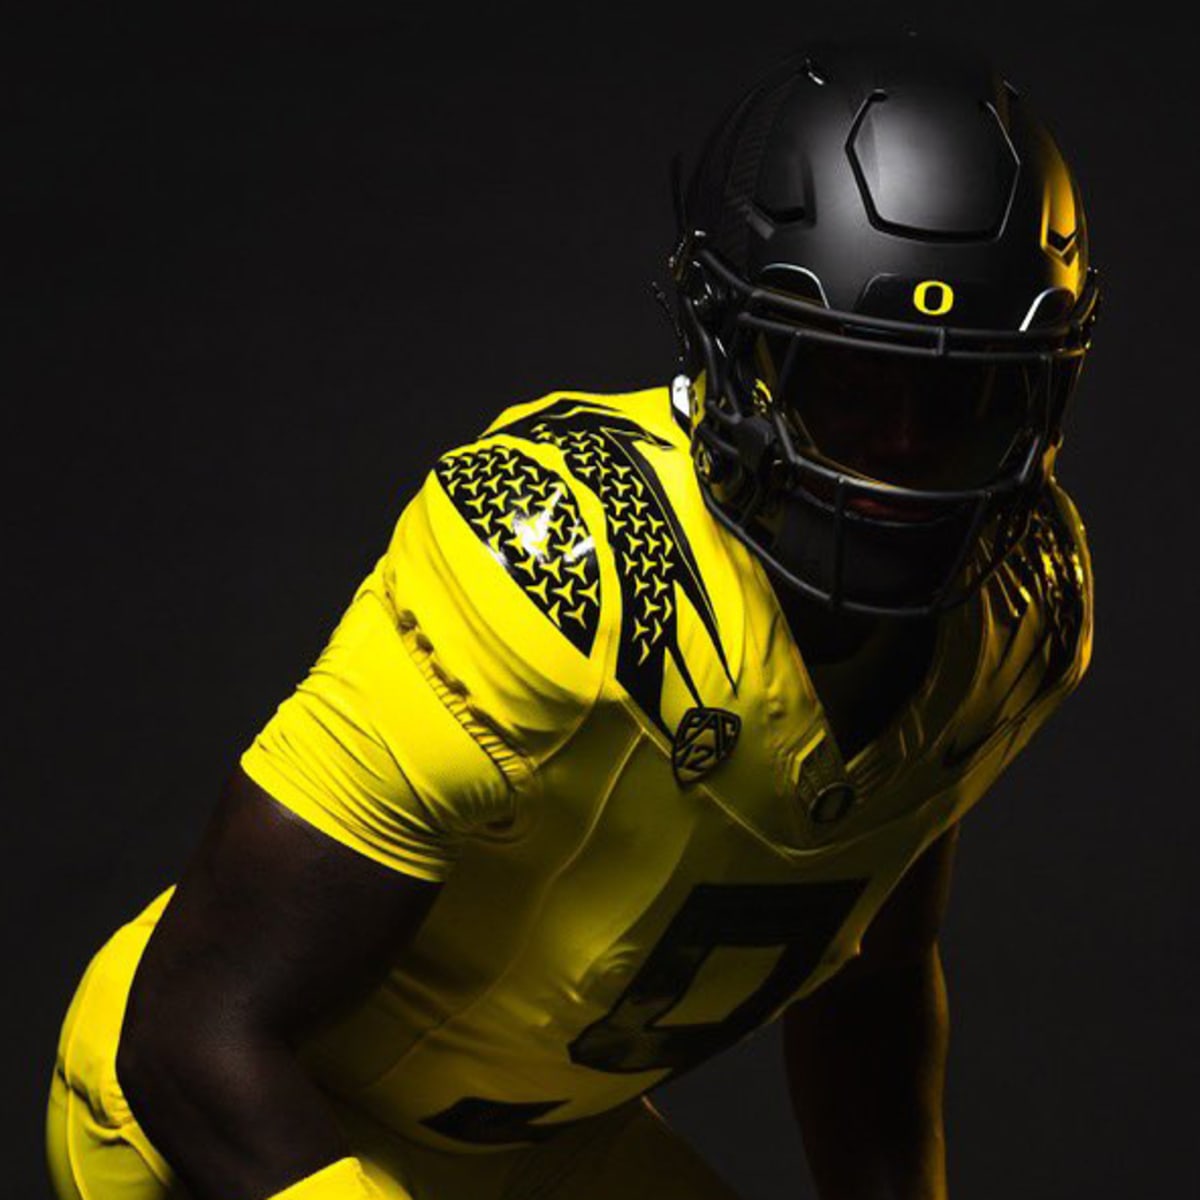 Famed Hilo clothier Sig Zane designs Oregon football uniforms to be worn  this week